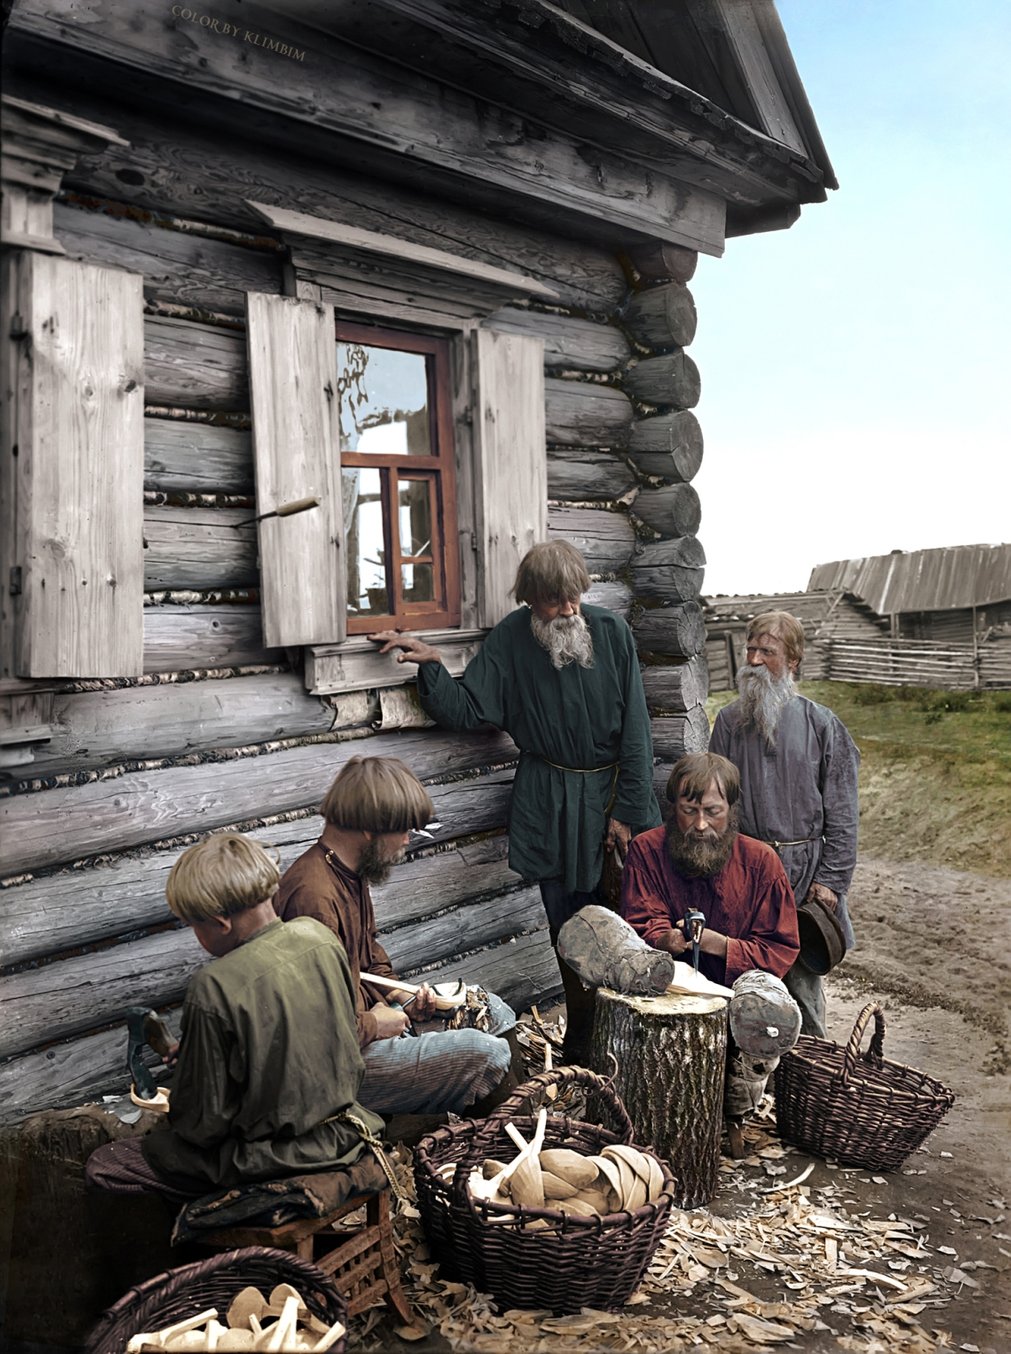 Wooden-spoon-production-Russia-photo-Maxim-Dmitriyev-colorized.jpg